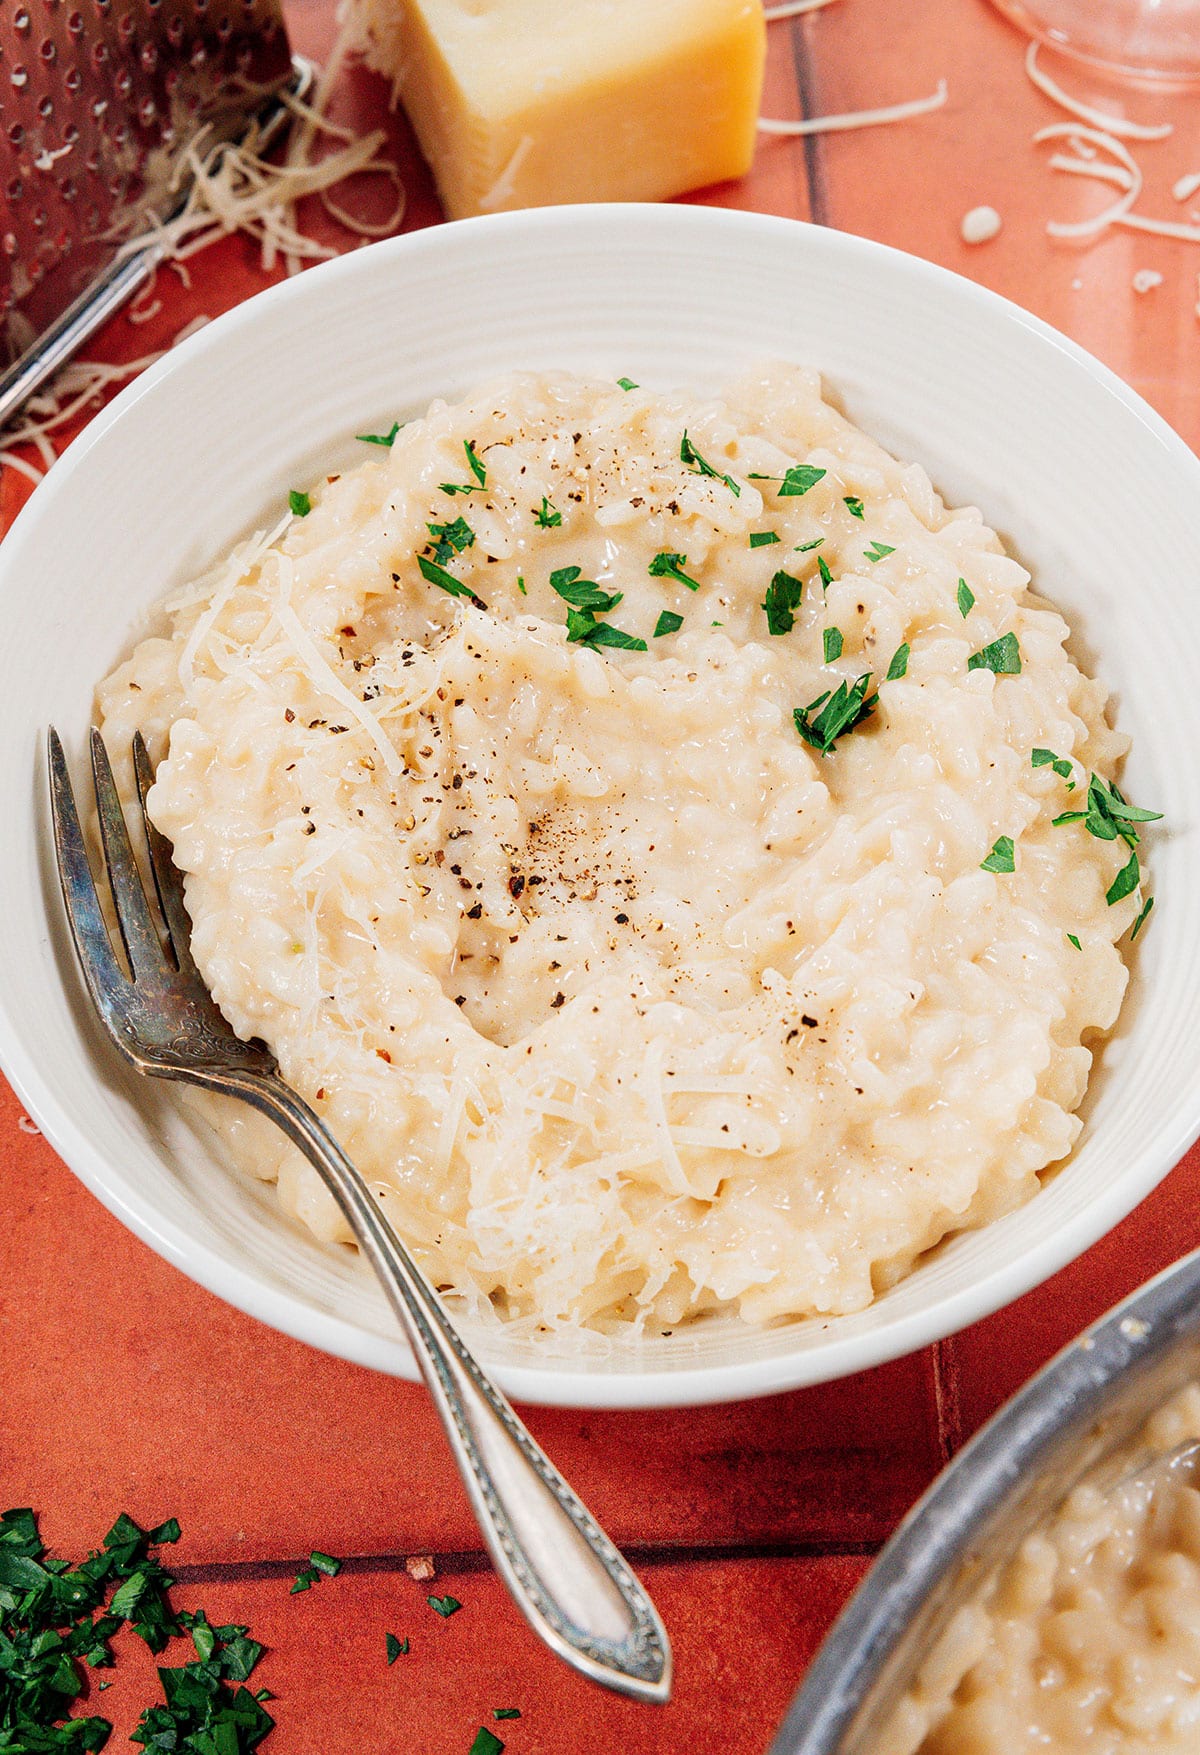 Risotto in a bowl with a spoon.